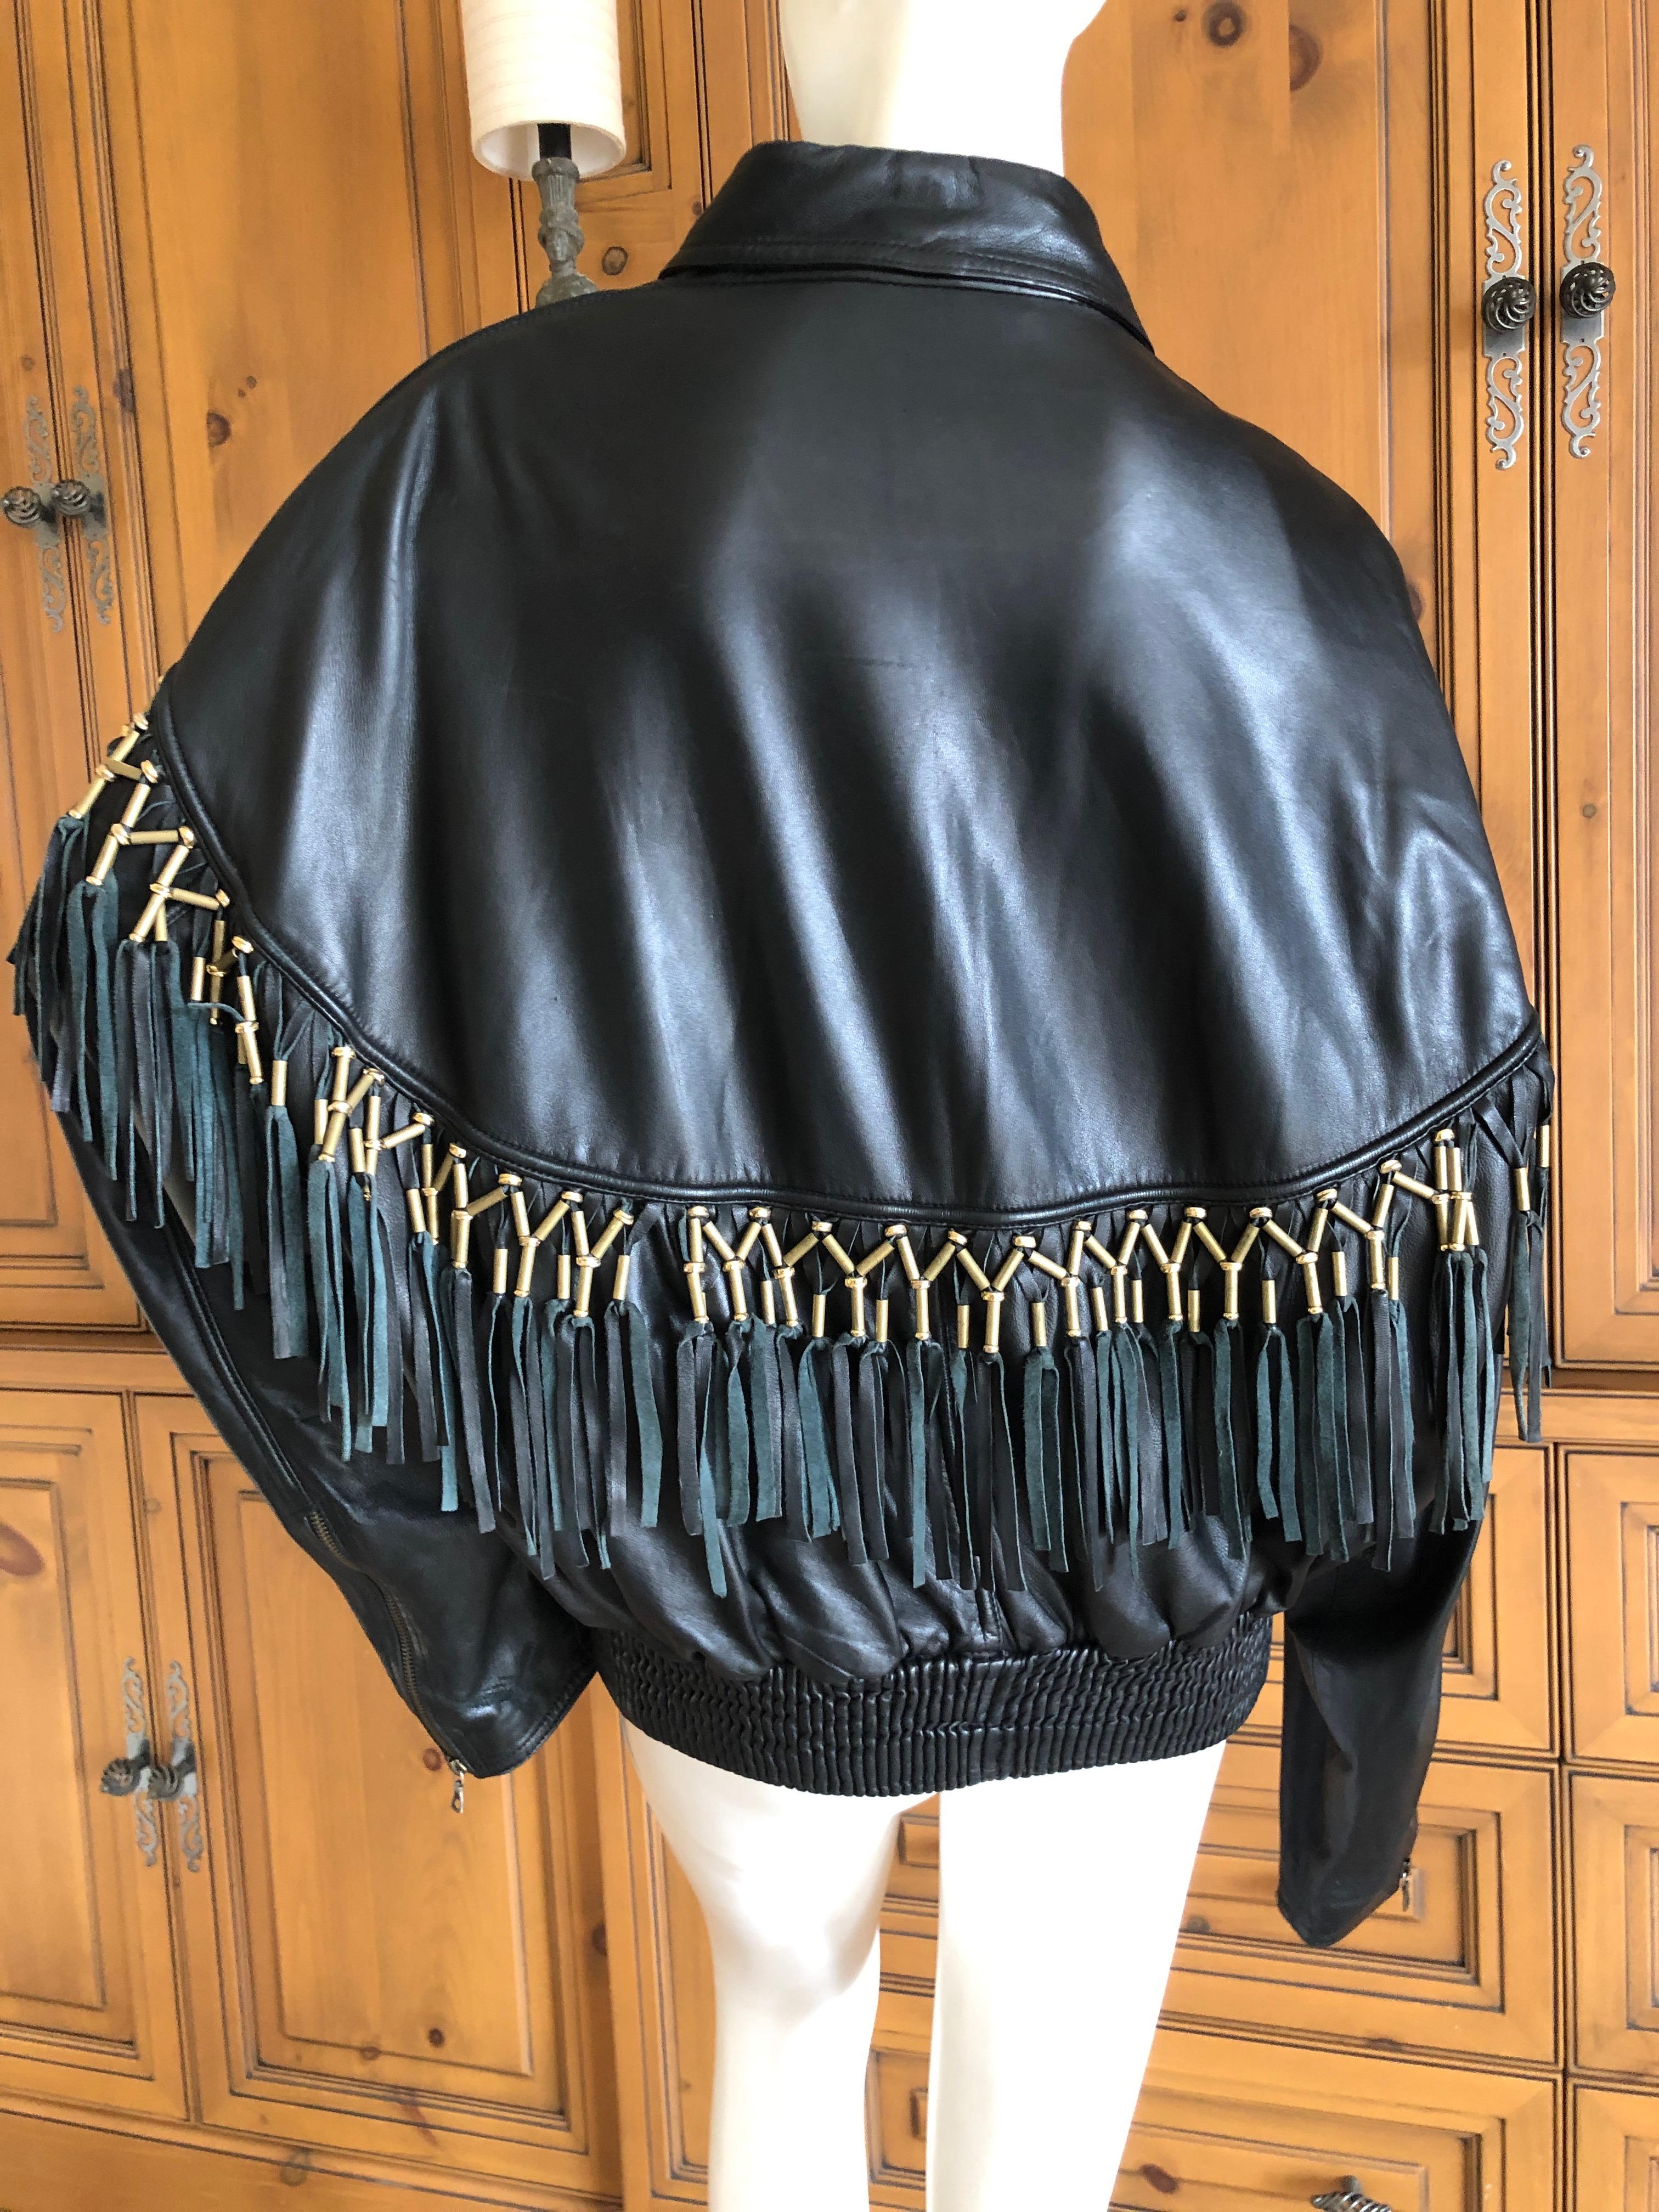 Gianni Versace 1984 Lambskin Leather Men's Jacket with Beaded Fringe.
Wonderful soft black leather jacket with zip front , two pockets and brass beaded fringe.
In great pre owned condition, there are some minor surface markings, see last photos
The